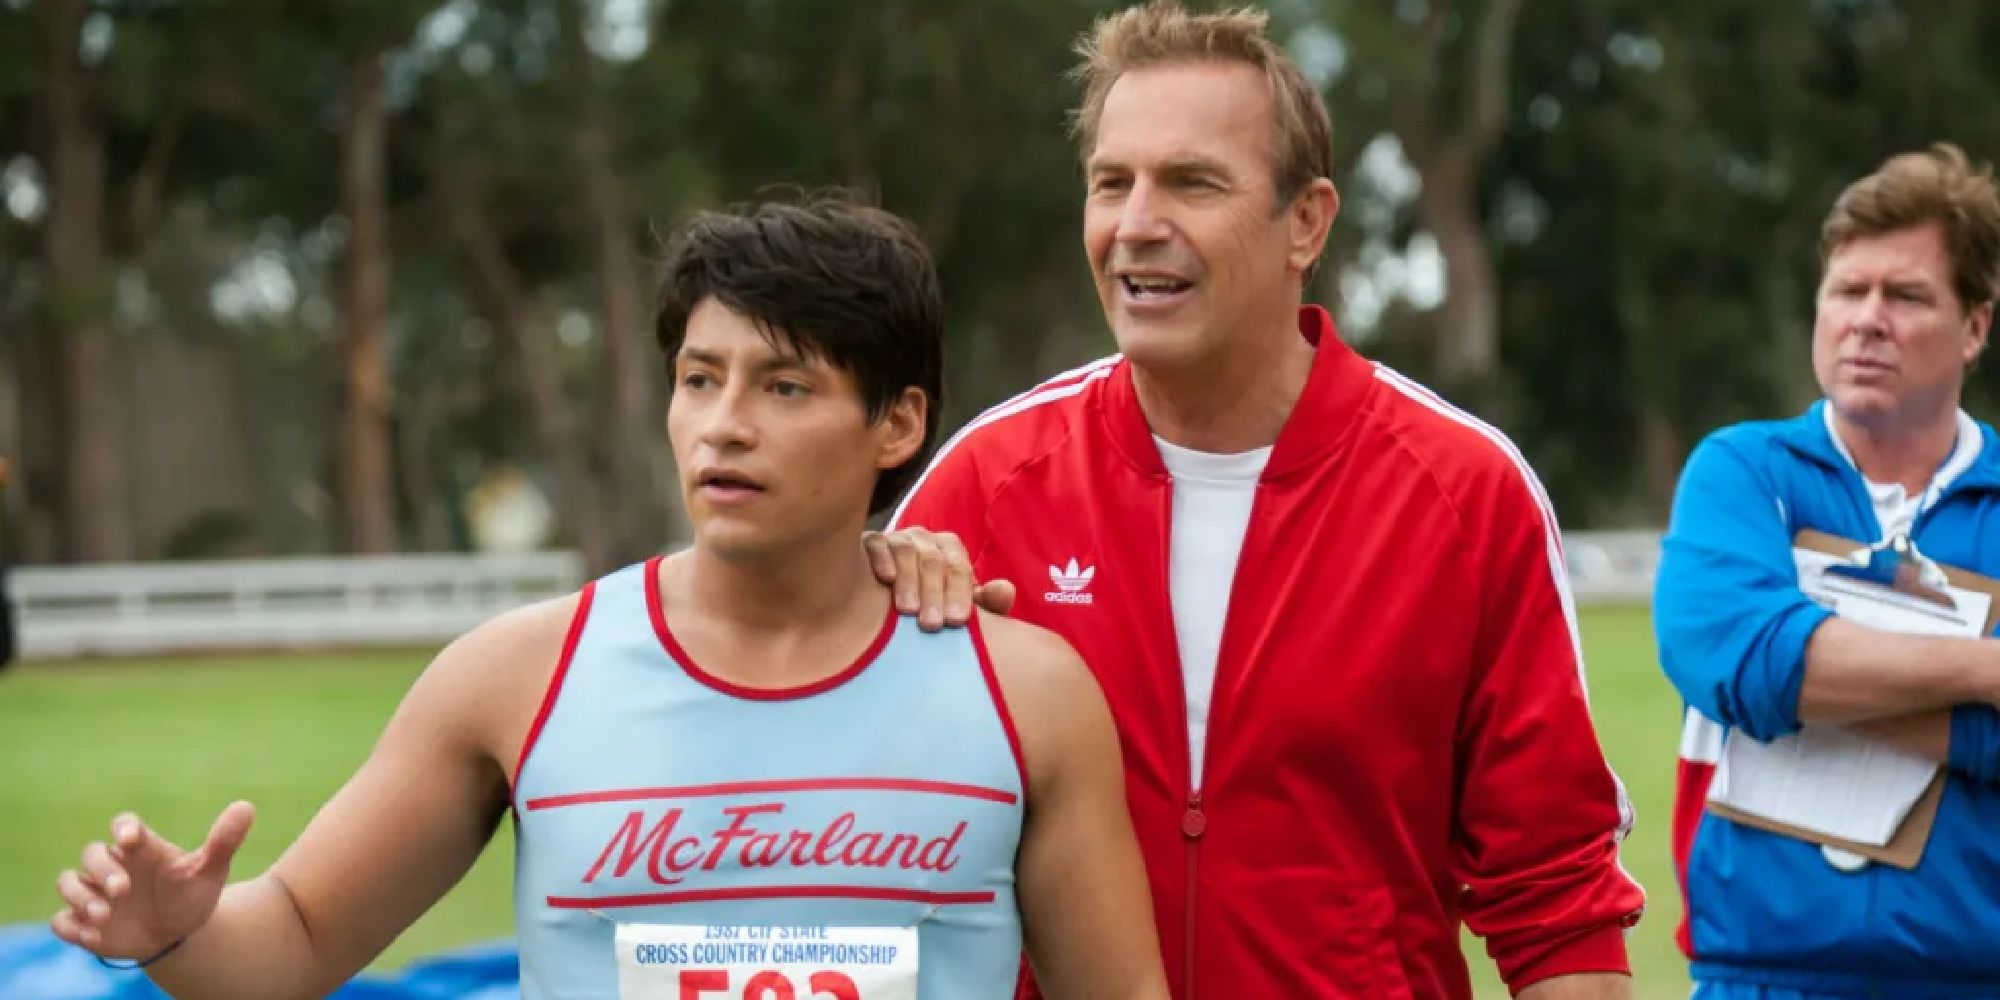 Kevin Costner as Jim White with his hand on a young man's shoulder in McFarland, USA